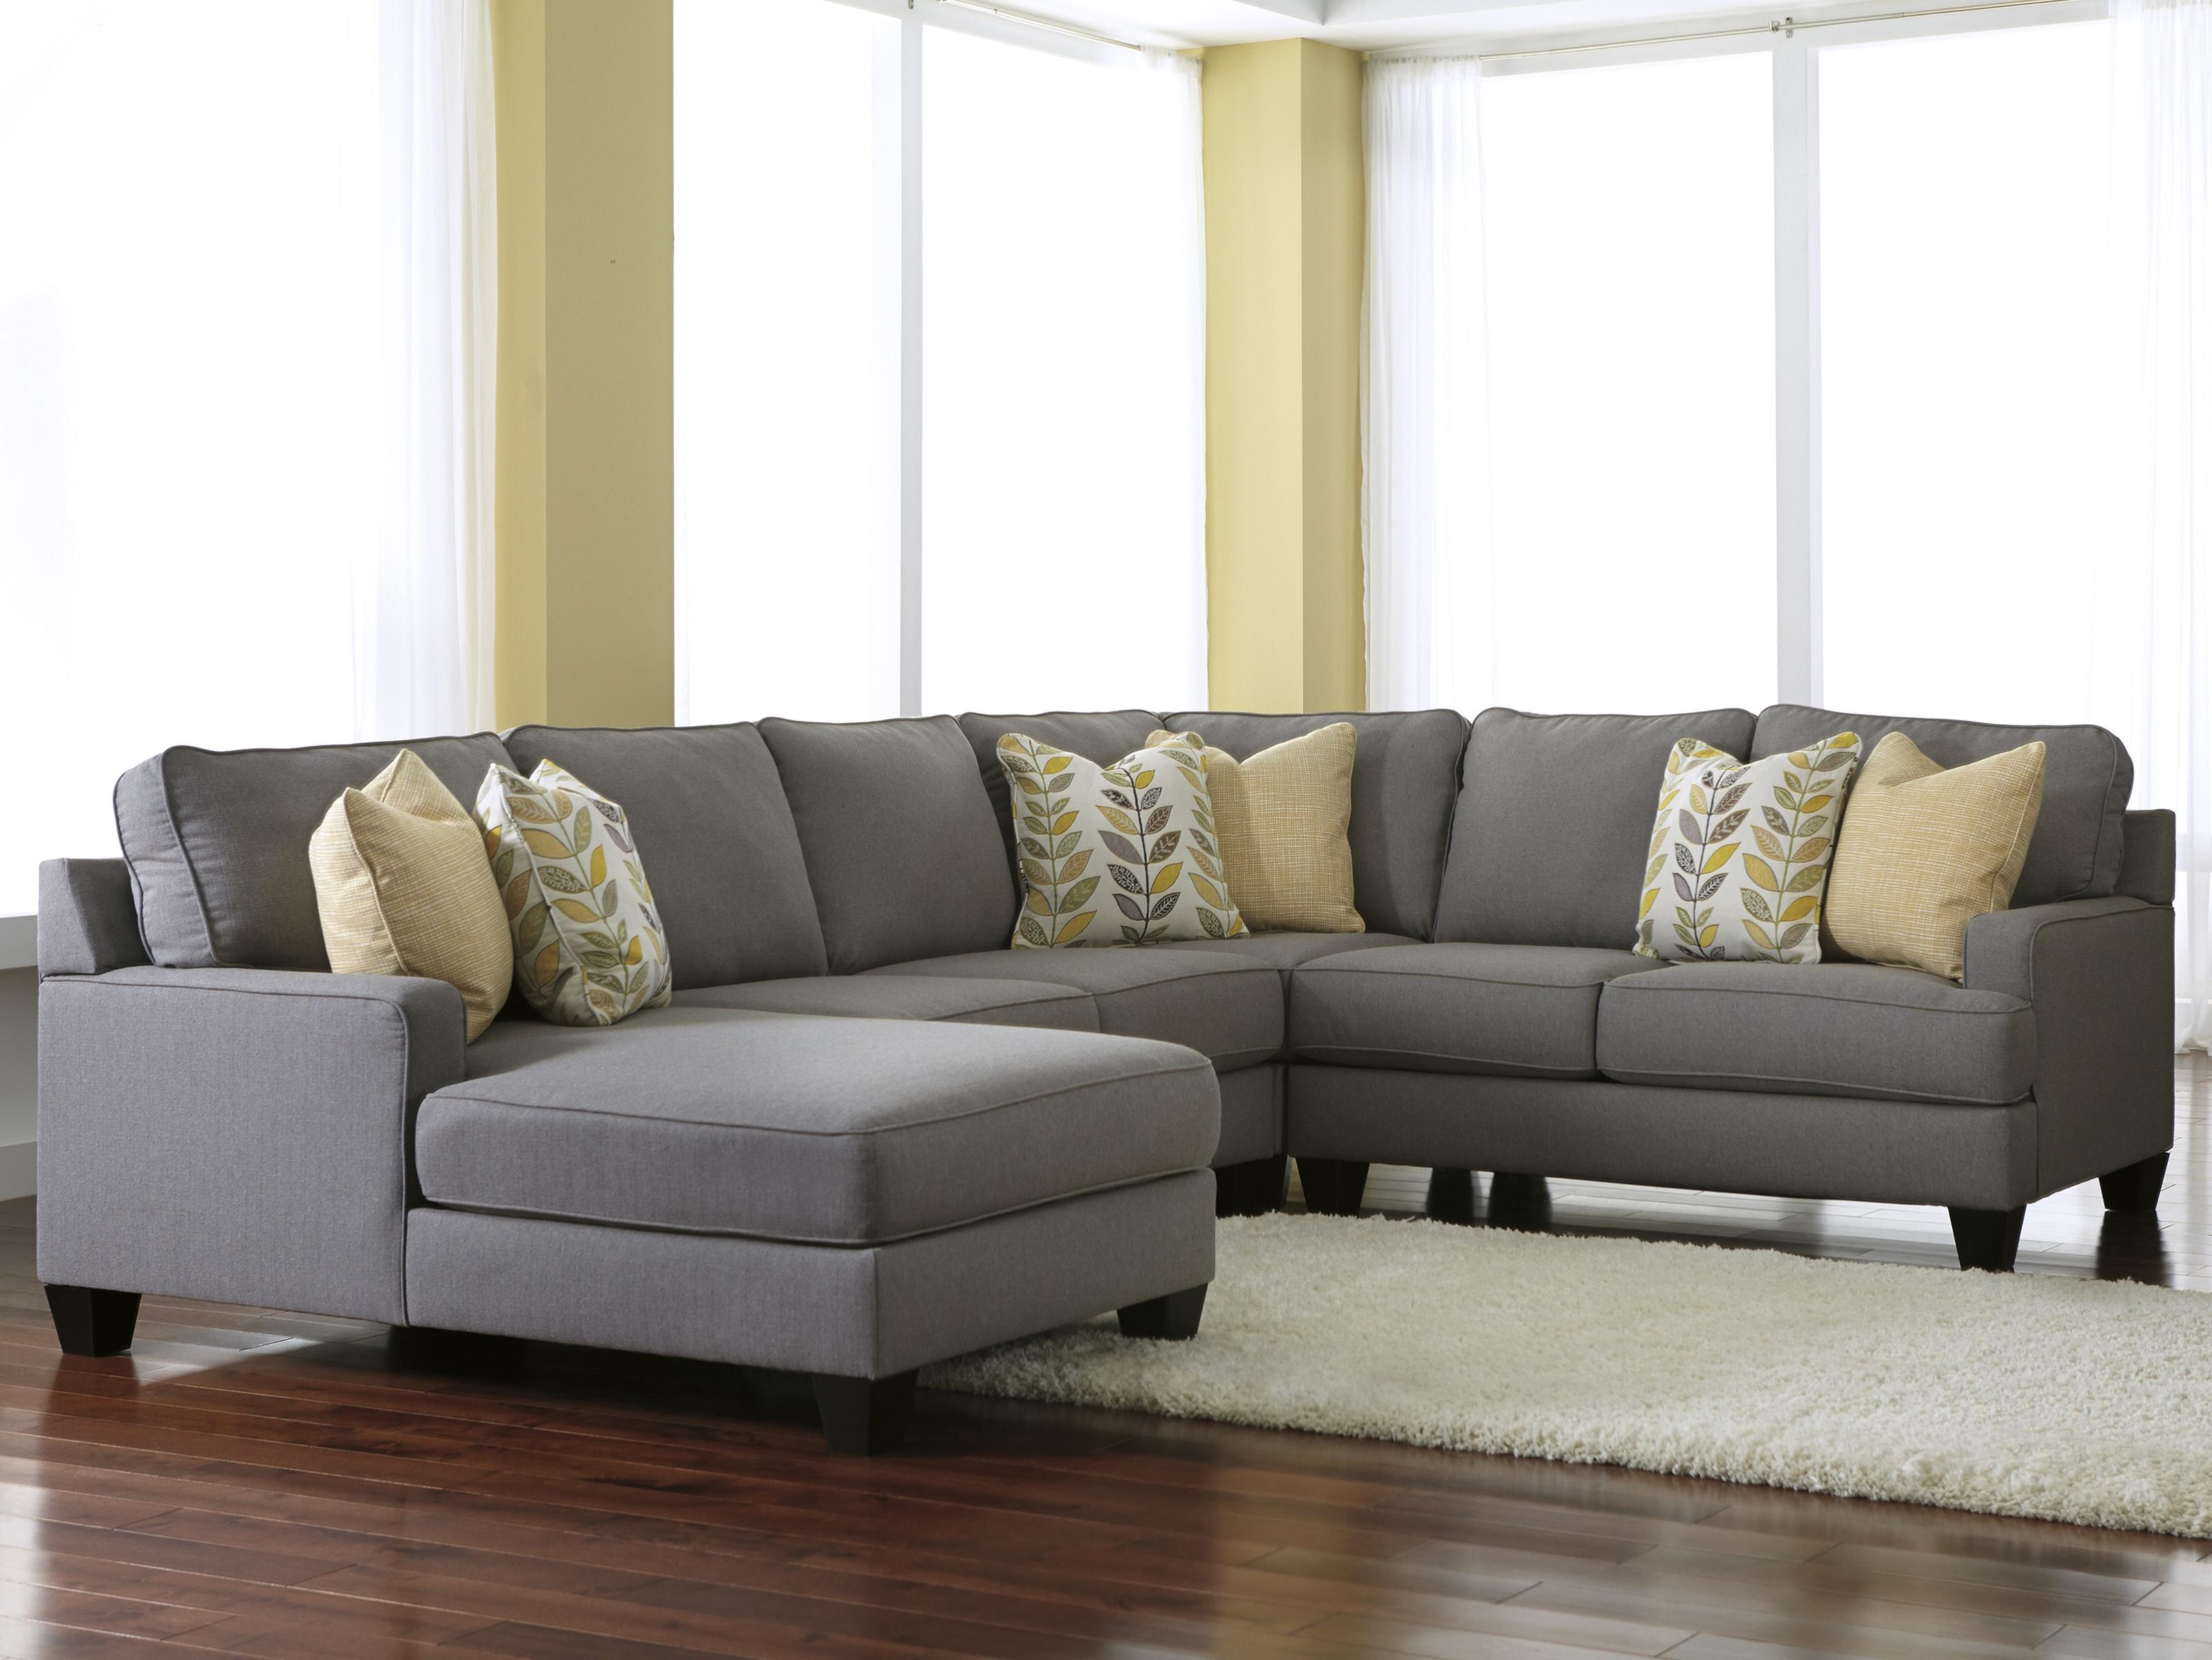 4-Piece Sectional Sofa with Left Chaise